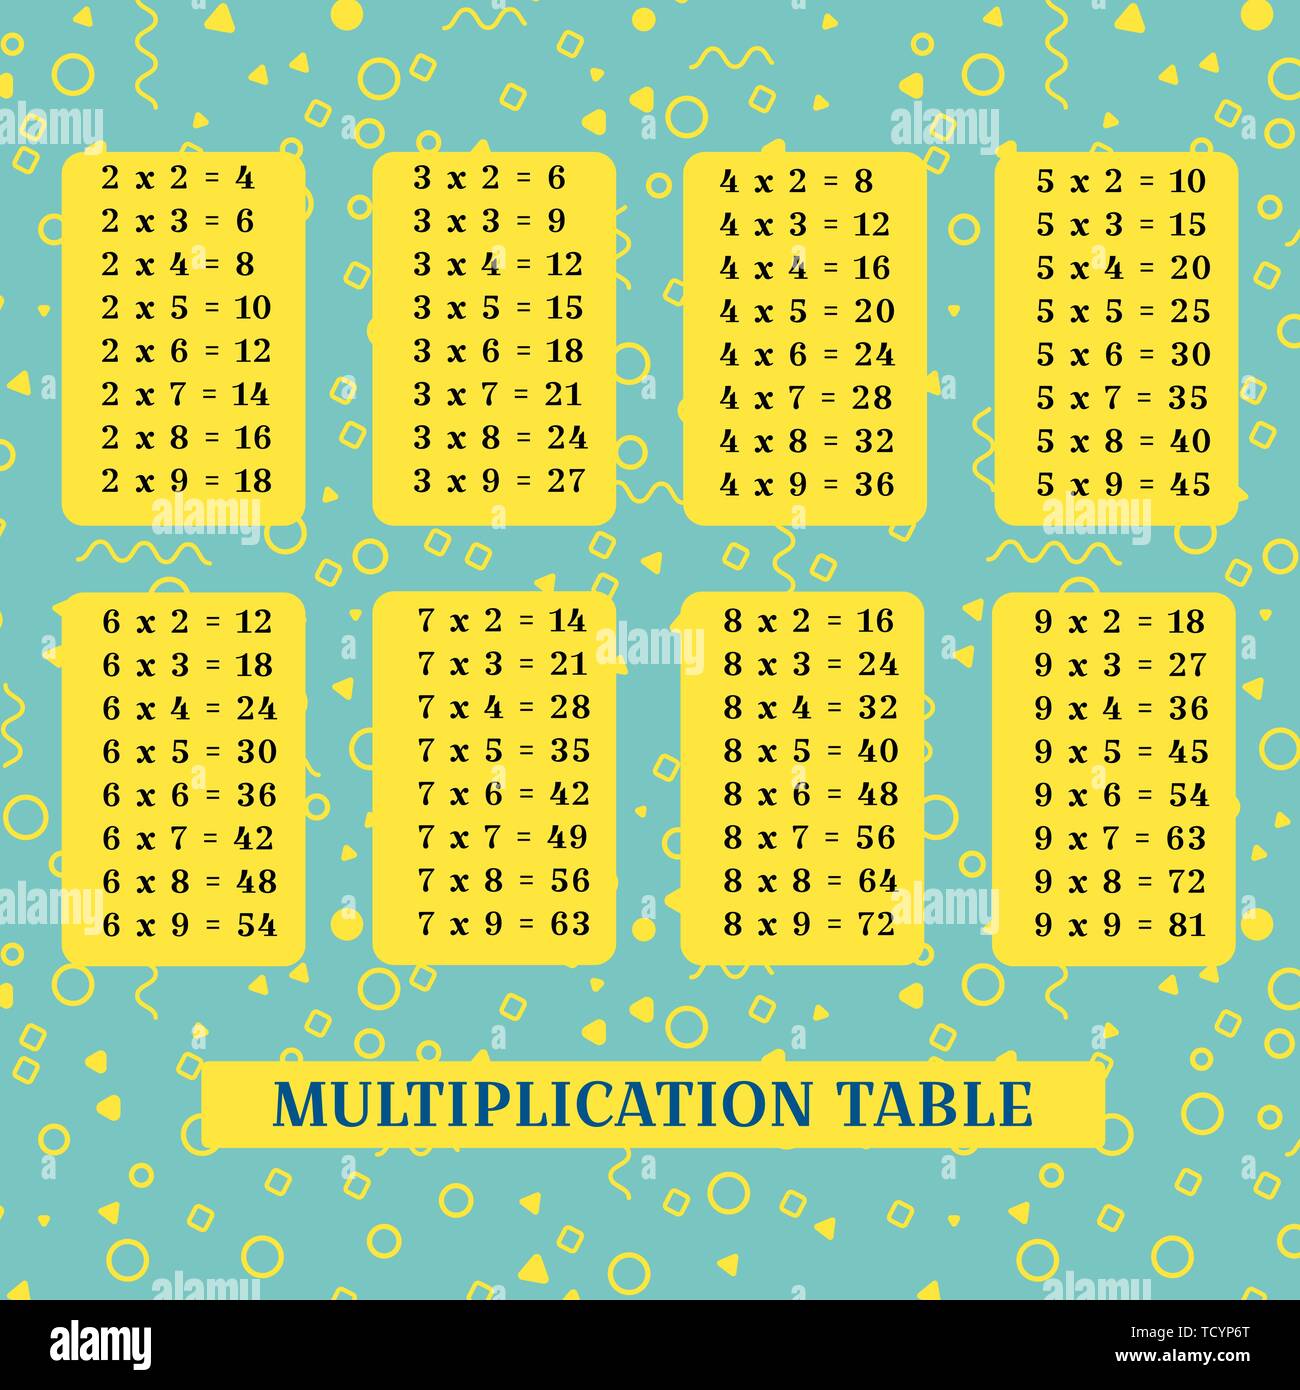 Multiplication Table Fill in the Blank, Times Table Poster, at Home  Learning, Primary School Materials Bundle Printable -  Sweden